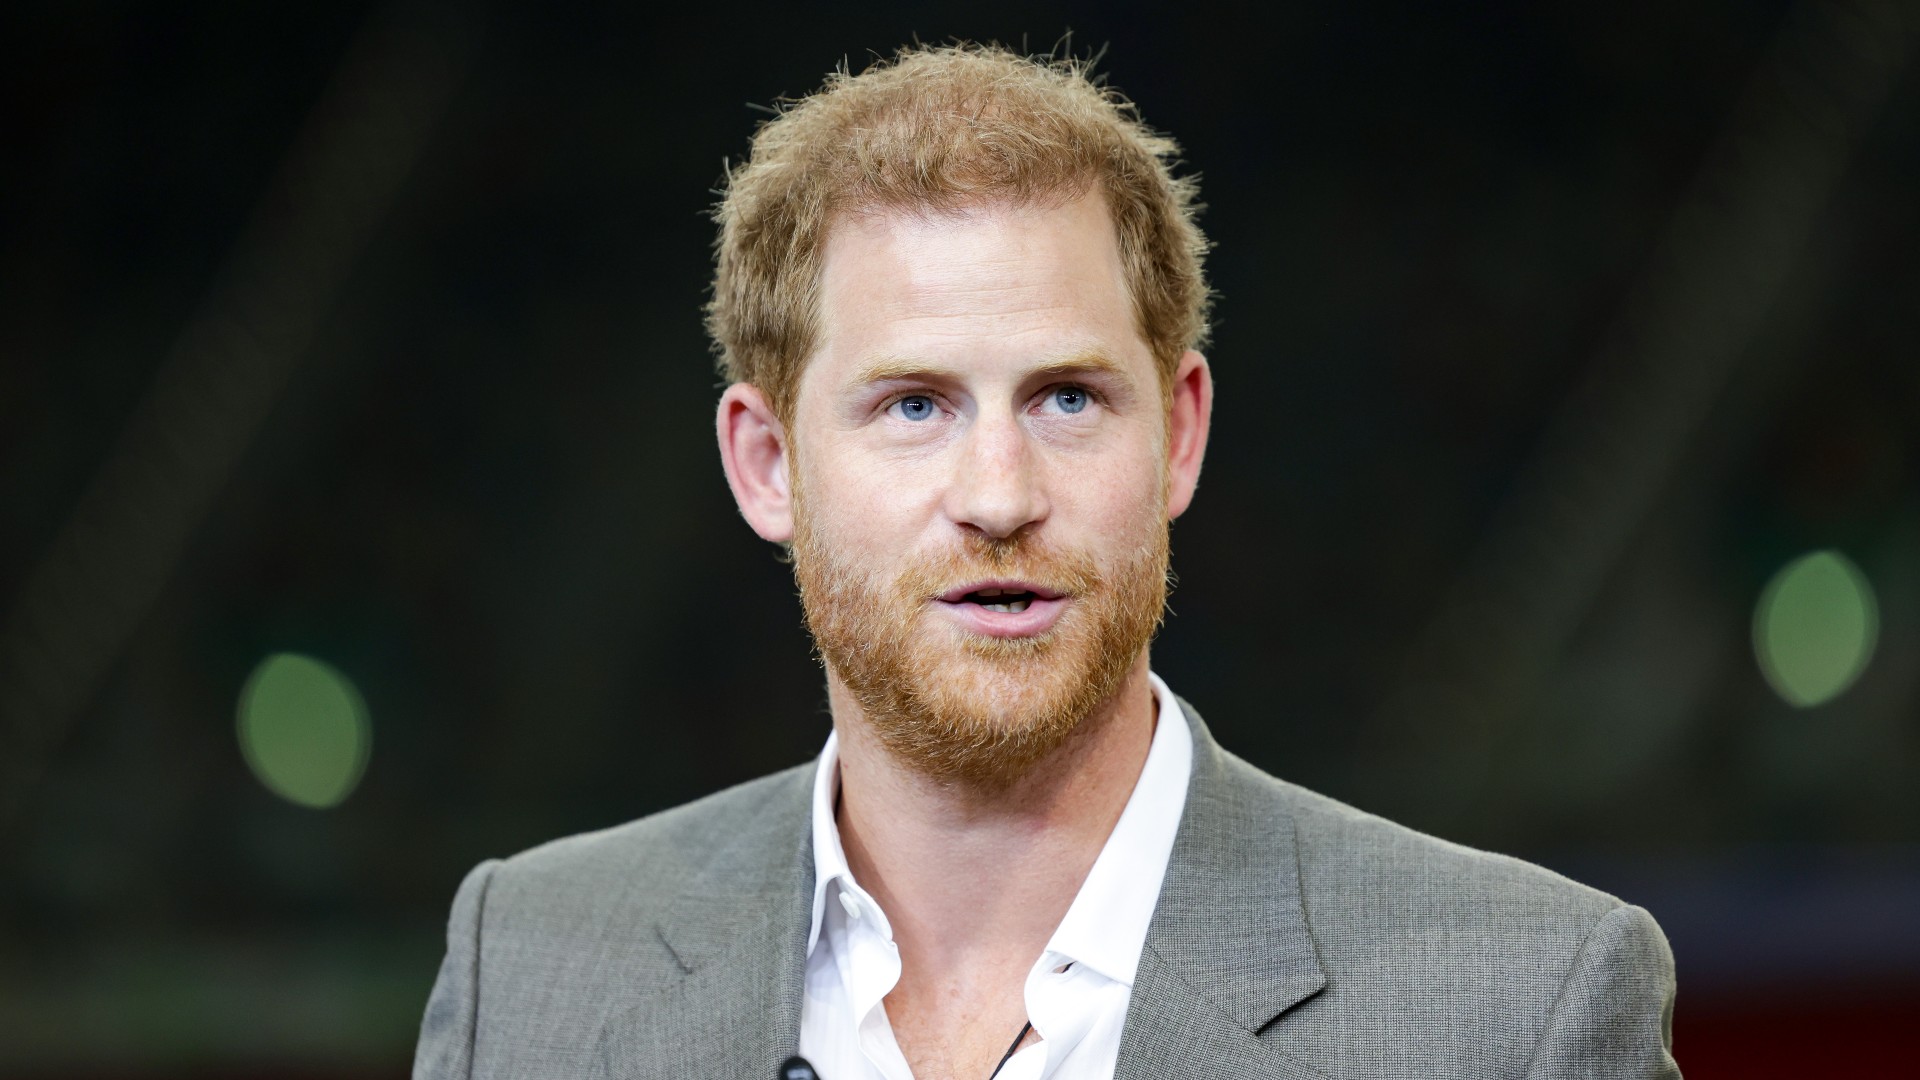 Prince Harry Could “Make Some Form of Reconciliation” with the Royal Family for the Coronation, Expert Says